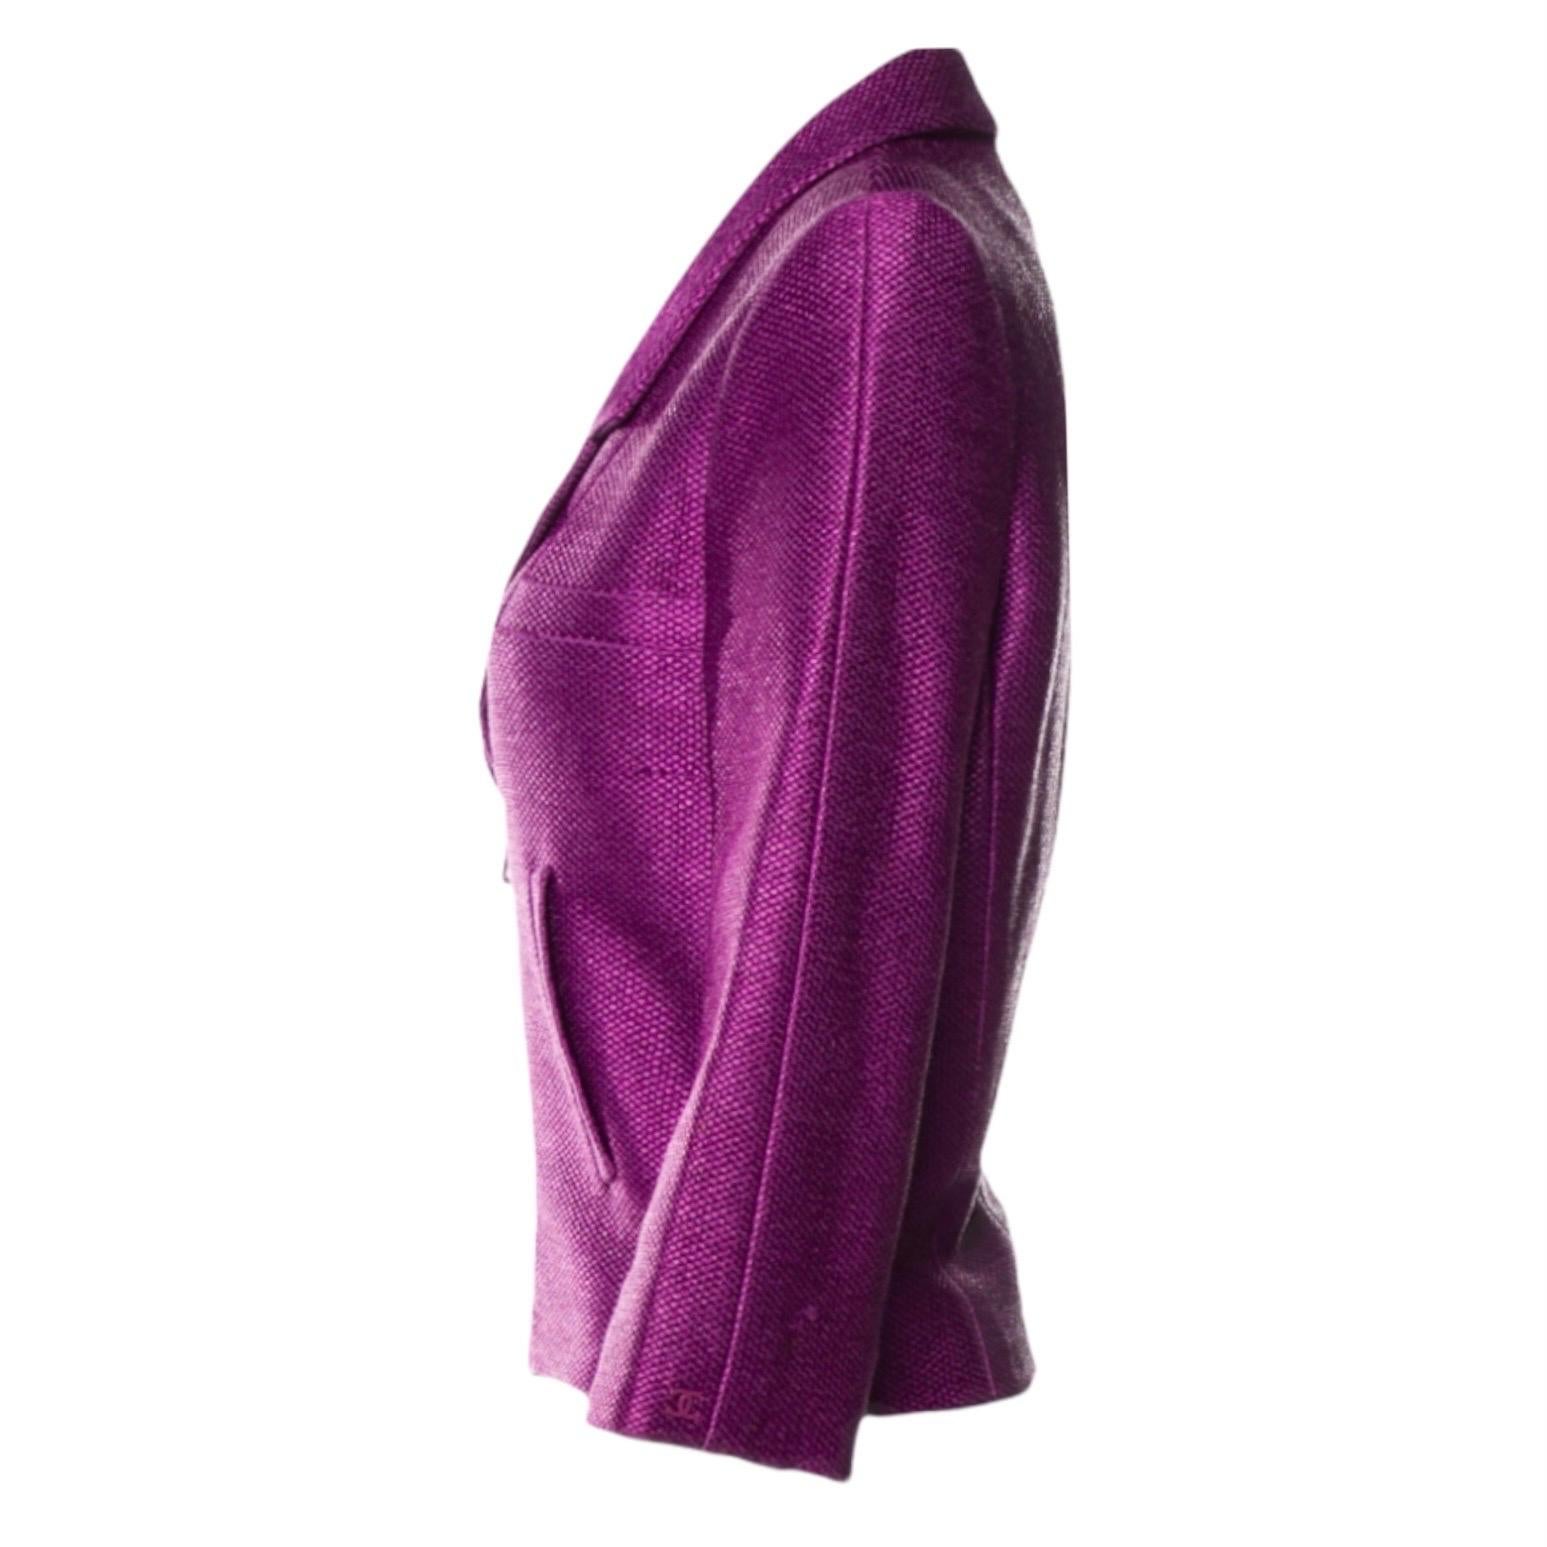 Beautiful CHANEL jacket 
A true CHANEL signature item that will last you for many years
Wonderful purple color- perfect with your favourite pair of jeans!
Closes in front with an asymmetric zipper, engraved 